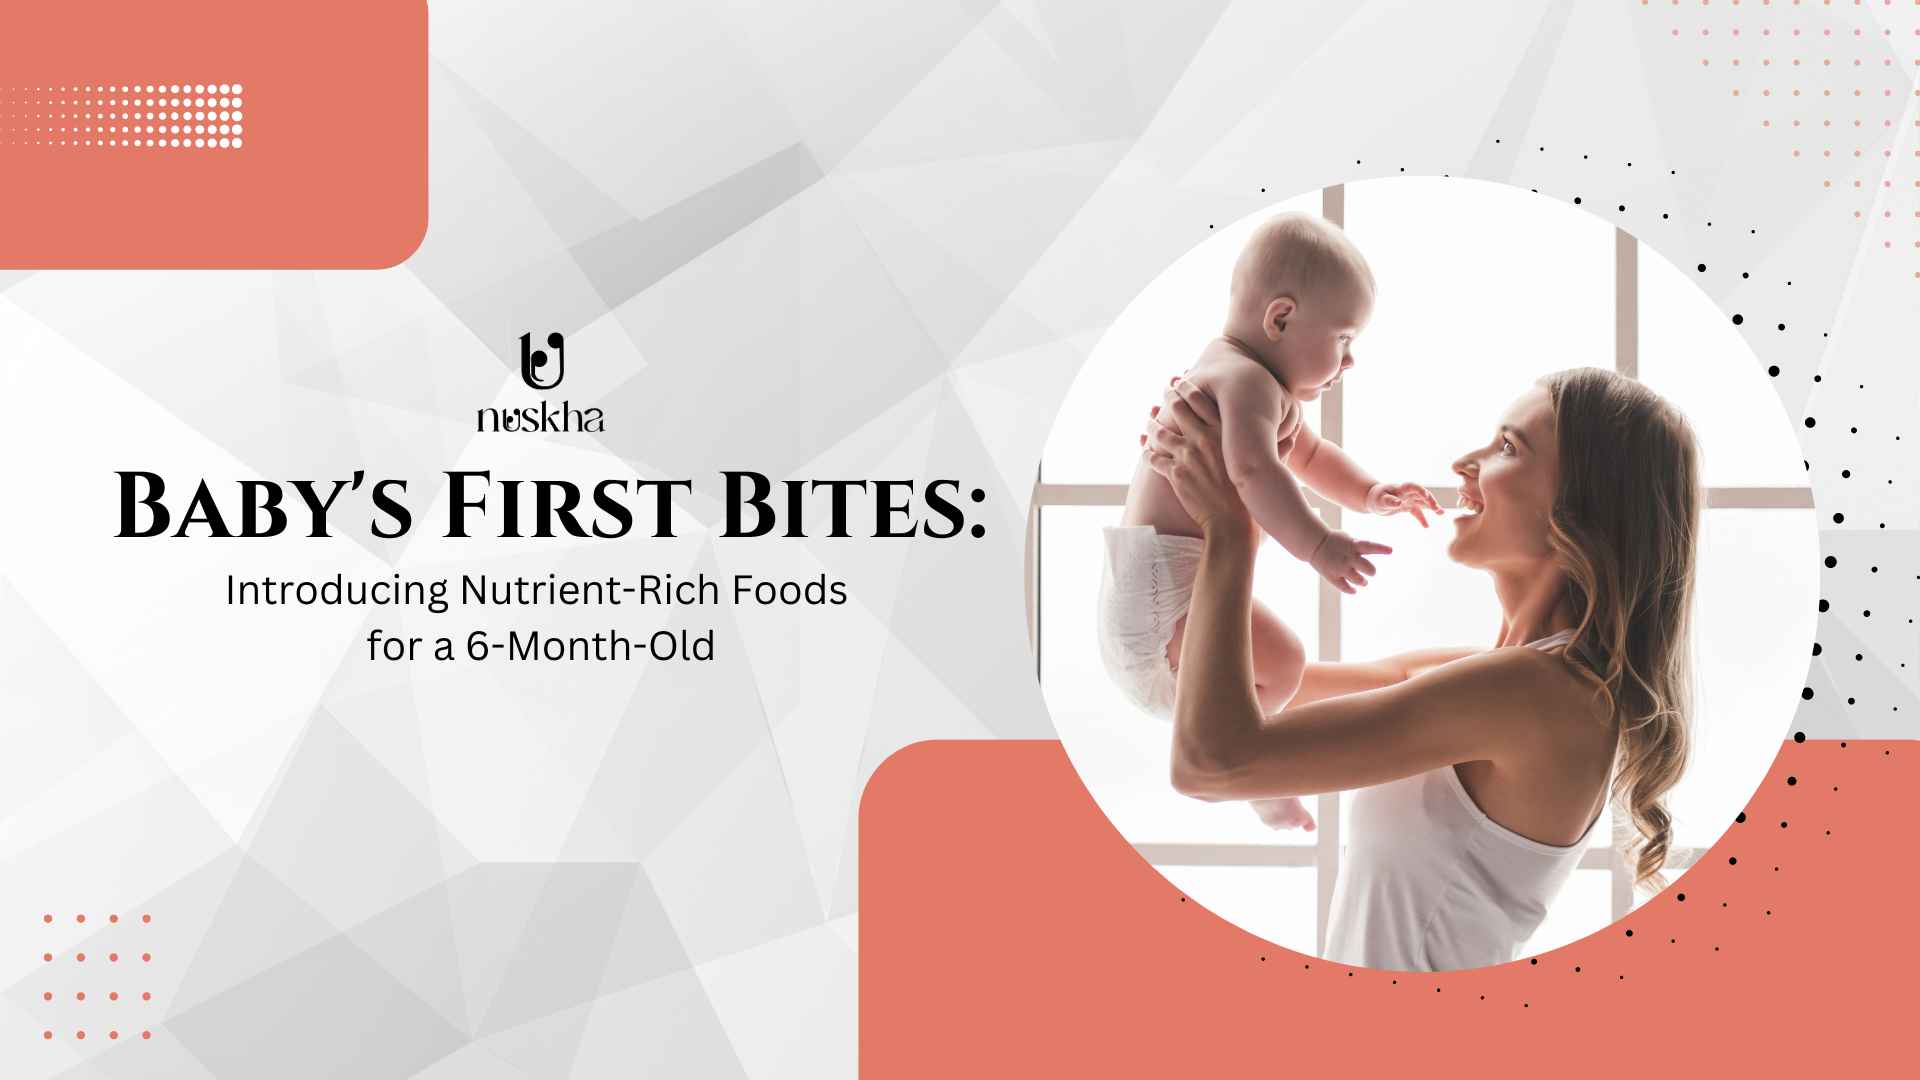 Baby's First Bites: Introducing Nutrient-Rich Foods for a 6-Month-Old